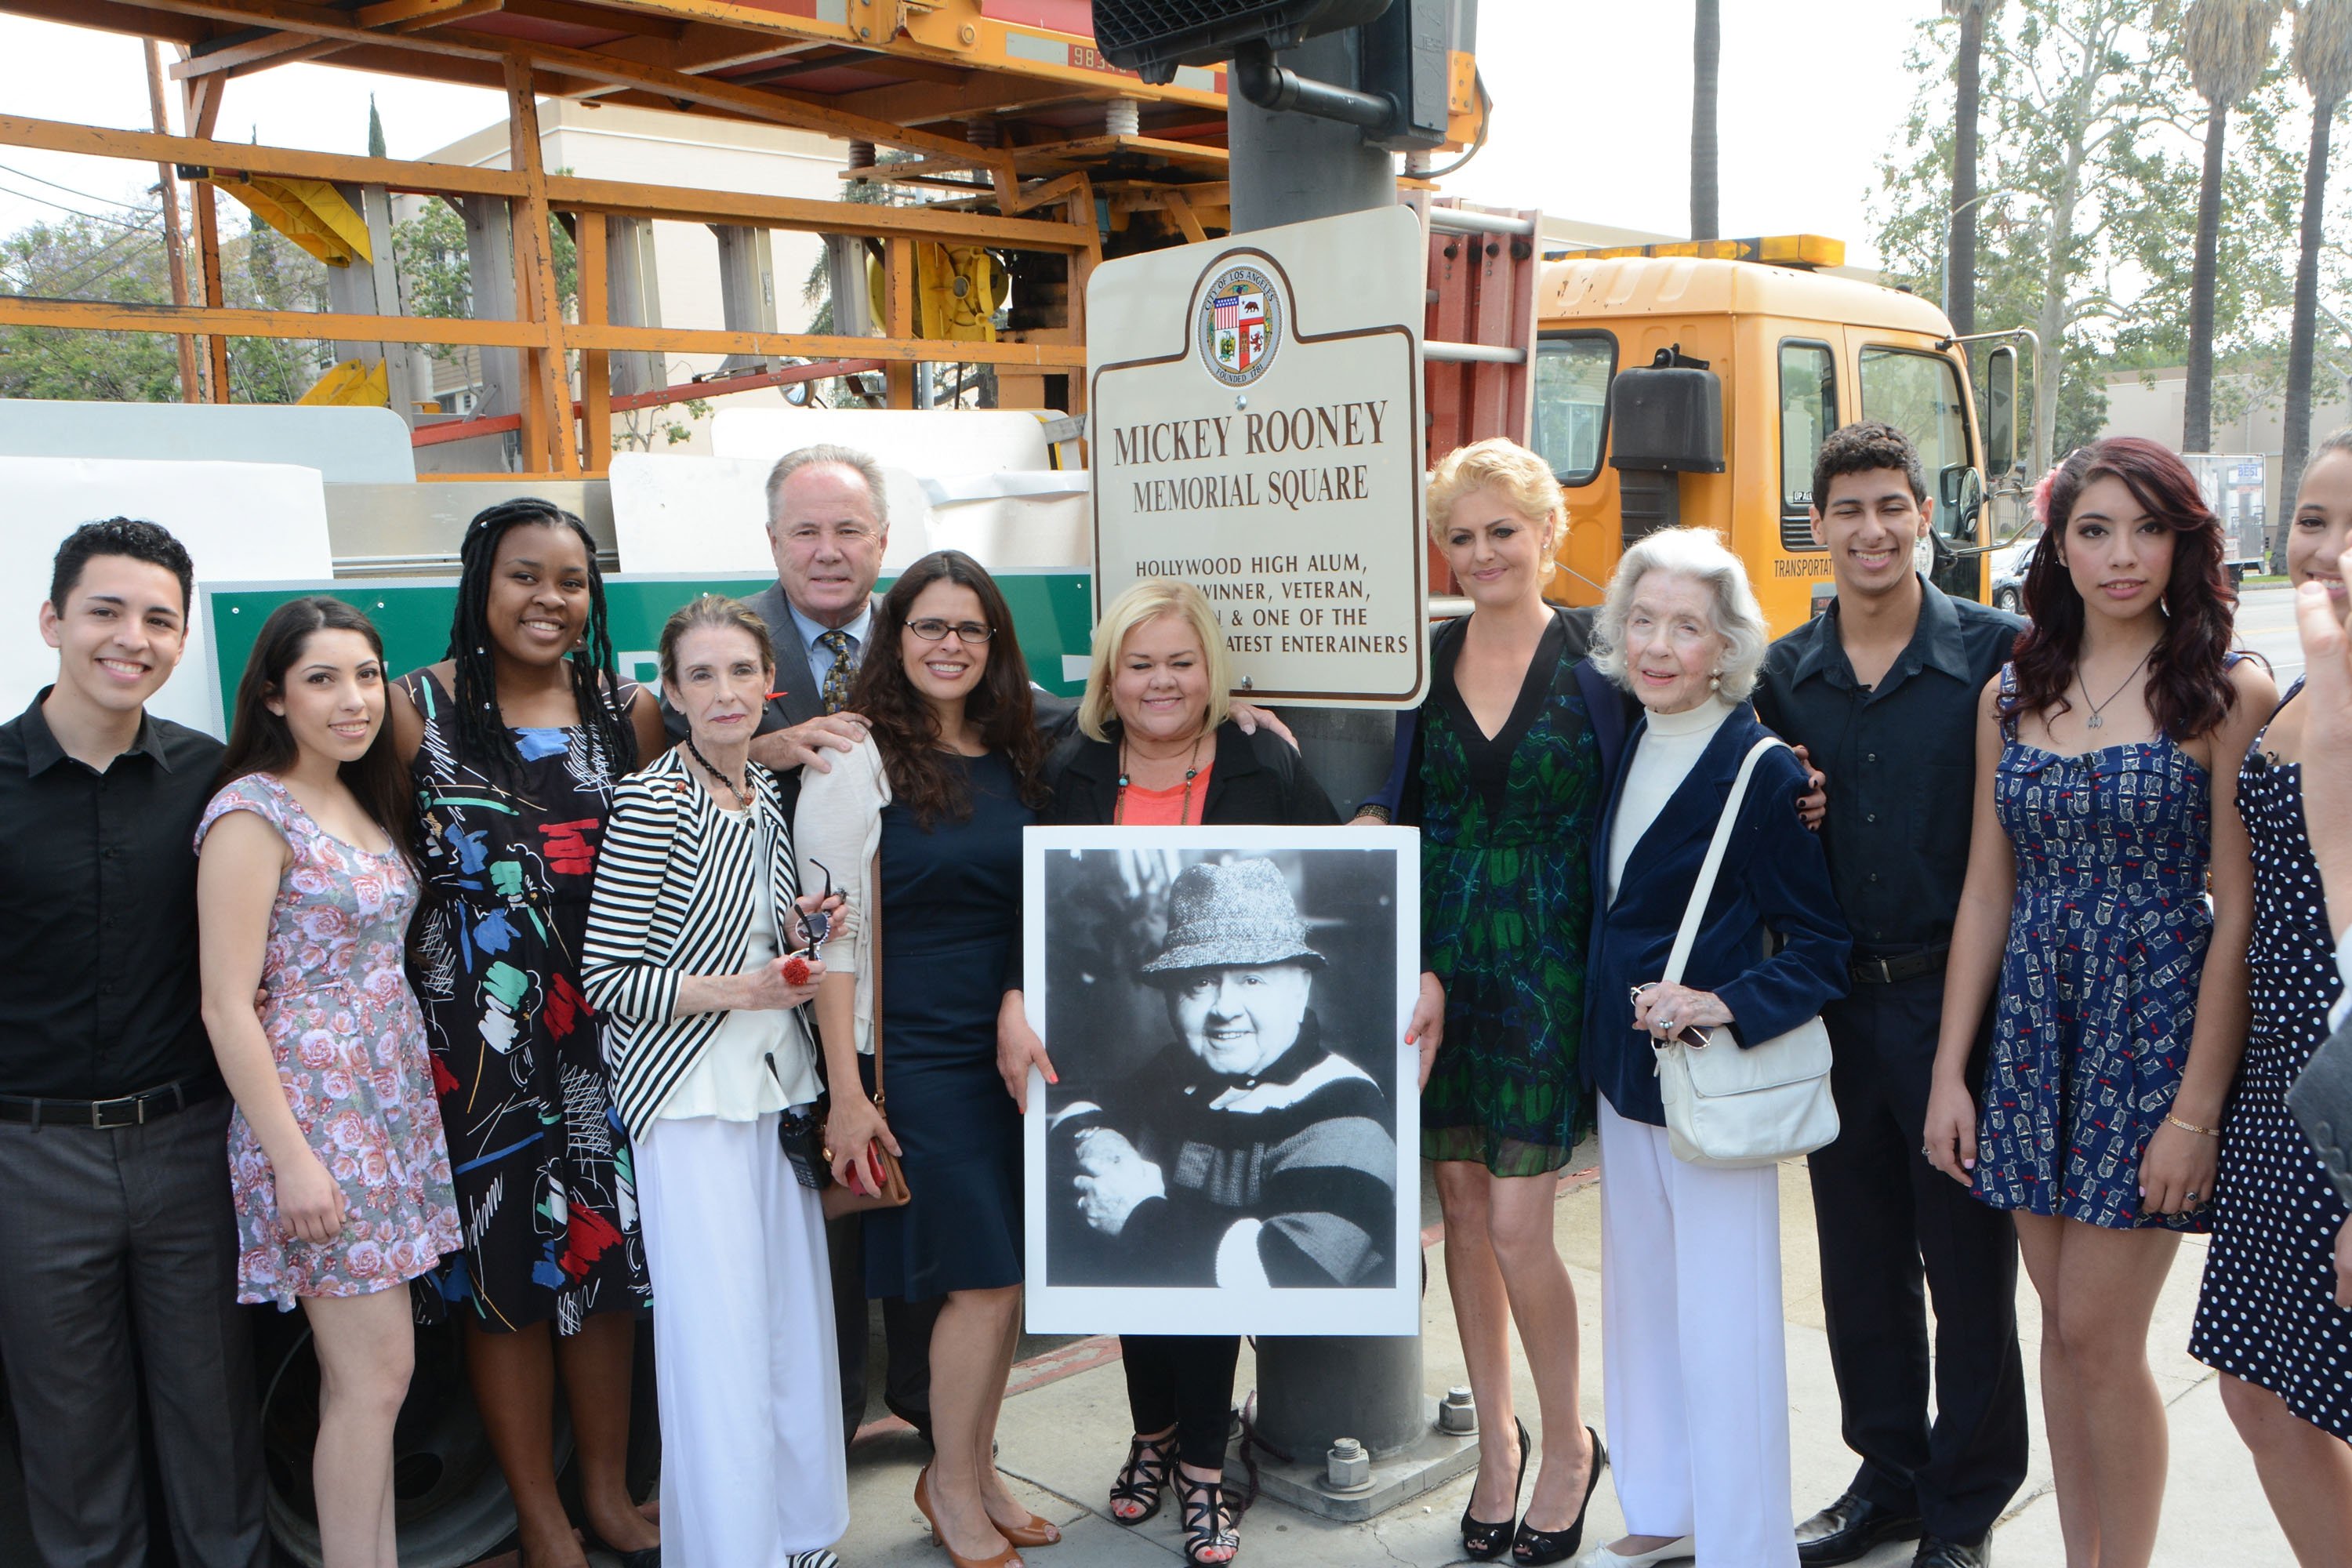 Actress Margaret O'Brien (2nd from left), City Councilman Tom LaBonge, Hollywood High School Principal Ms. Alejandra Sanchez, Kelly Rooney (daughter of Mickey Rooney), Dominique Rooney (grand daughter of Mickey Rooney) and actress Marsha Hunt with members of the band The Hollywood Kids attend the Mickey Rooney Memorial Square Dedication Ceremony, Sunset Blvd. on June 1, 2015 | Source: Getty Images